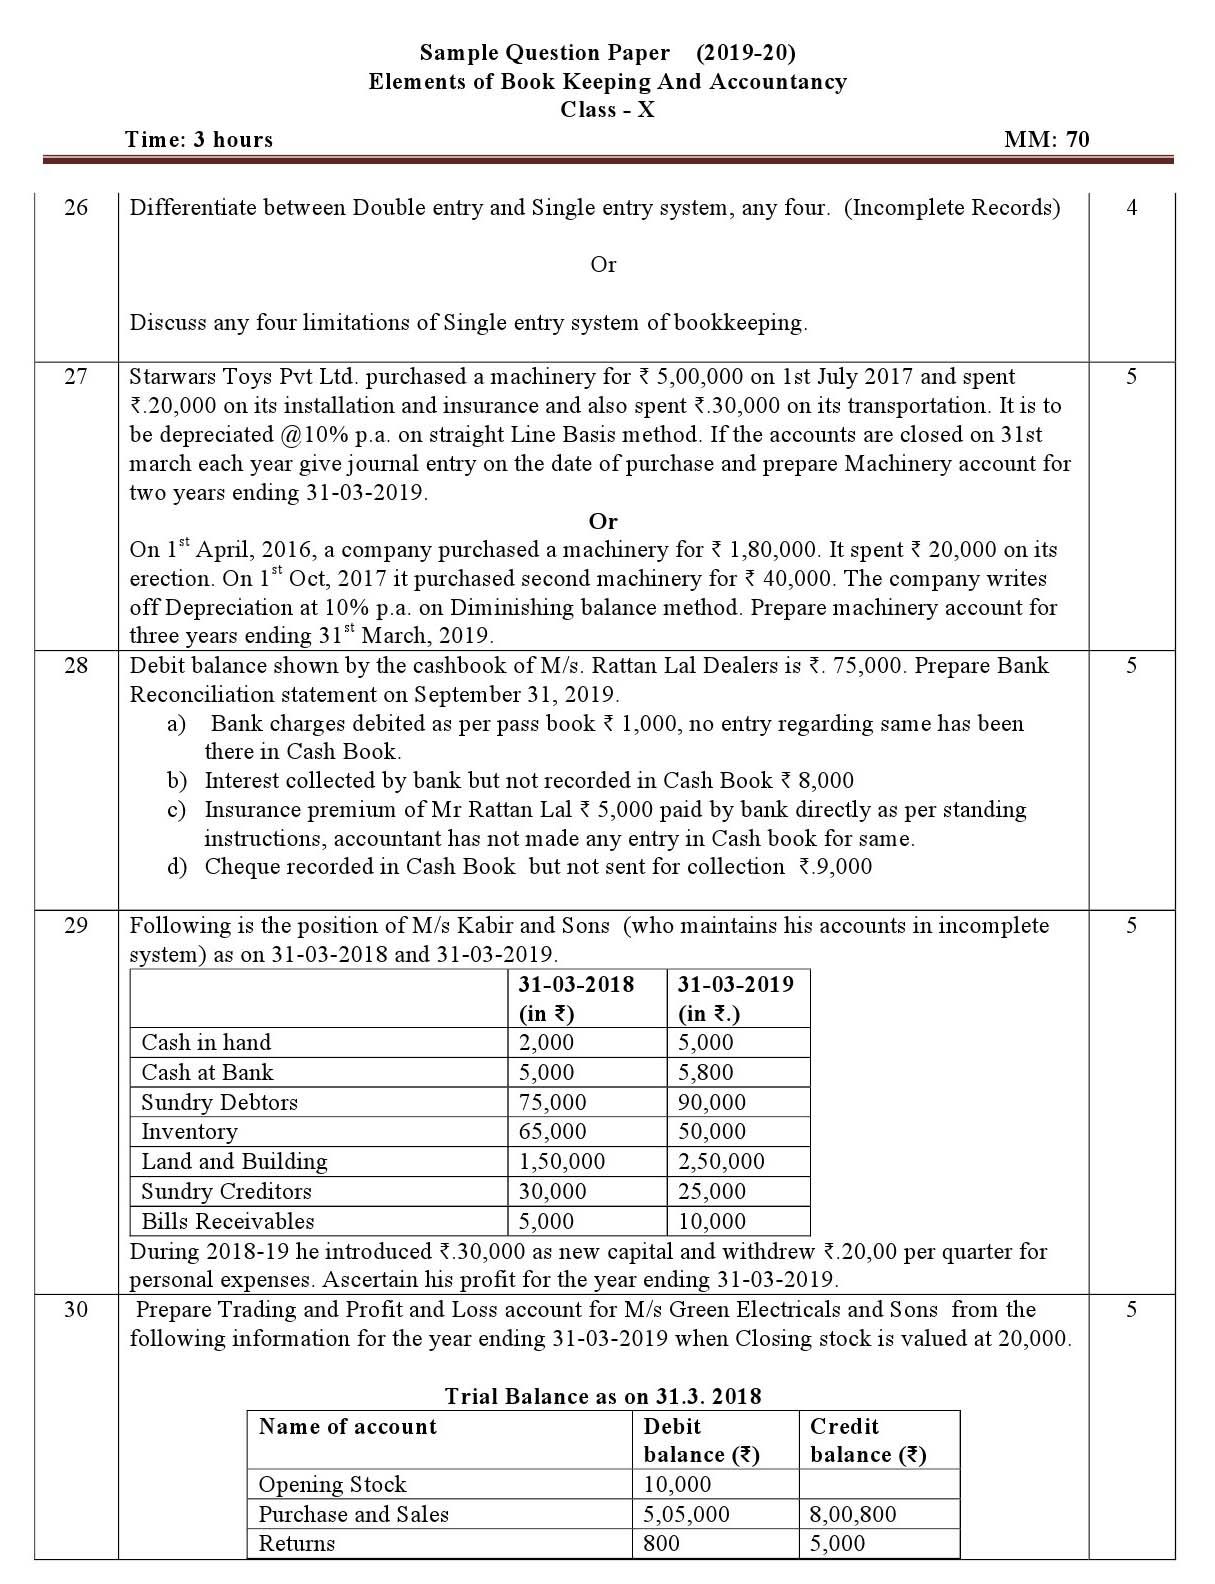 Elements of Book Keeping And Accountancy CBSE Class X Sample Question Paper 2019 20 - Image 4